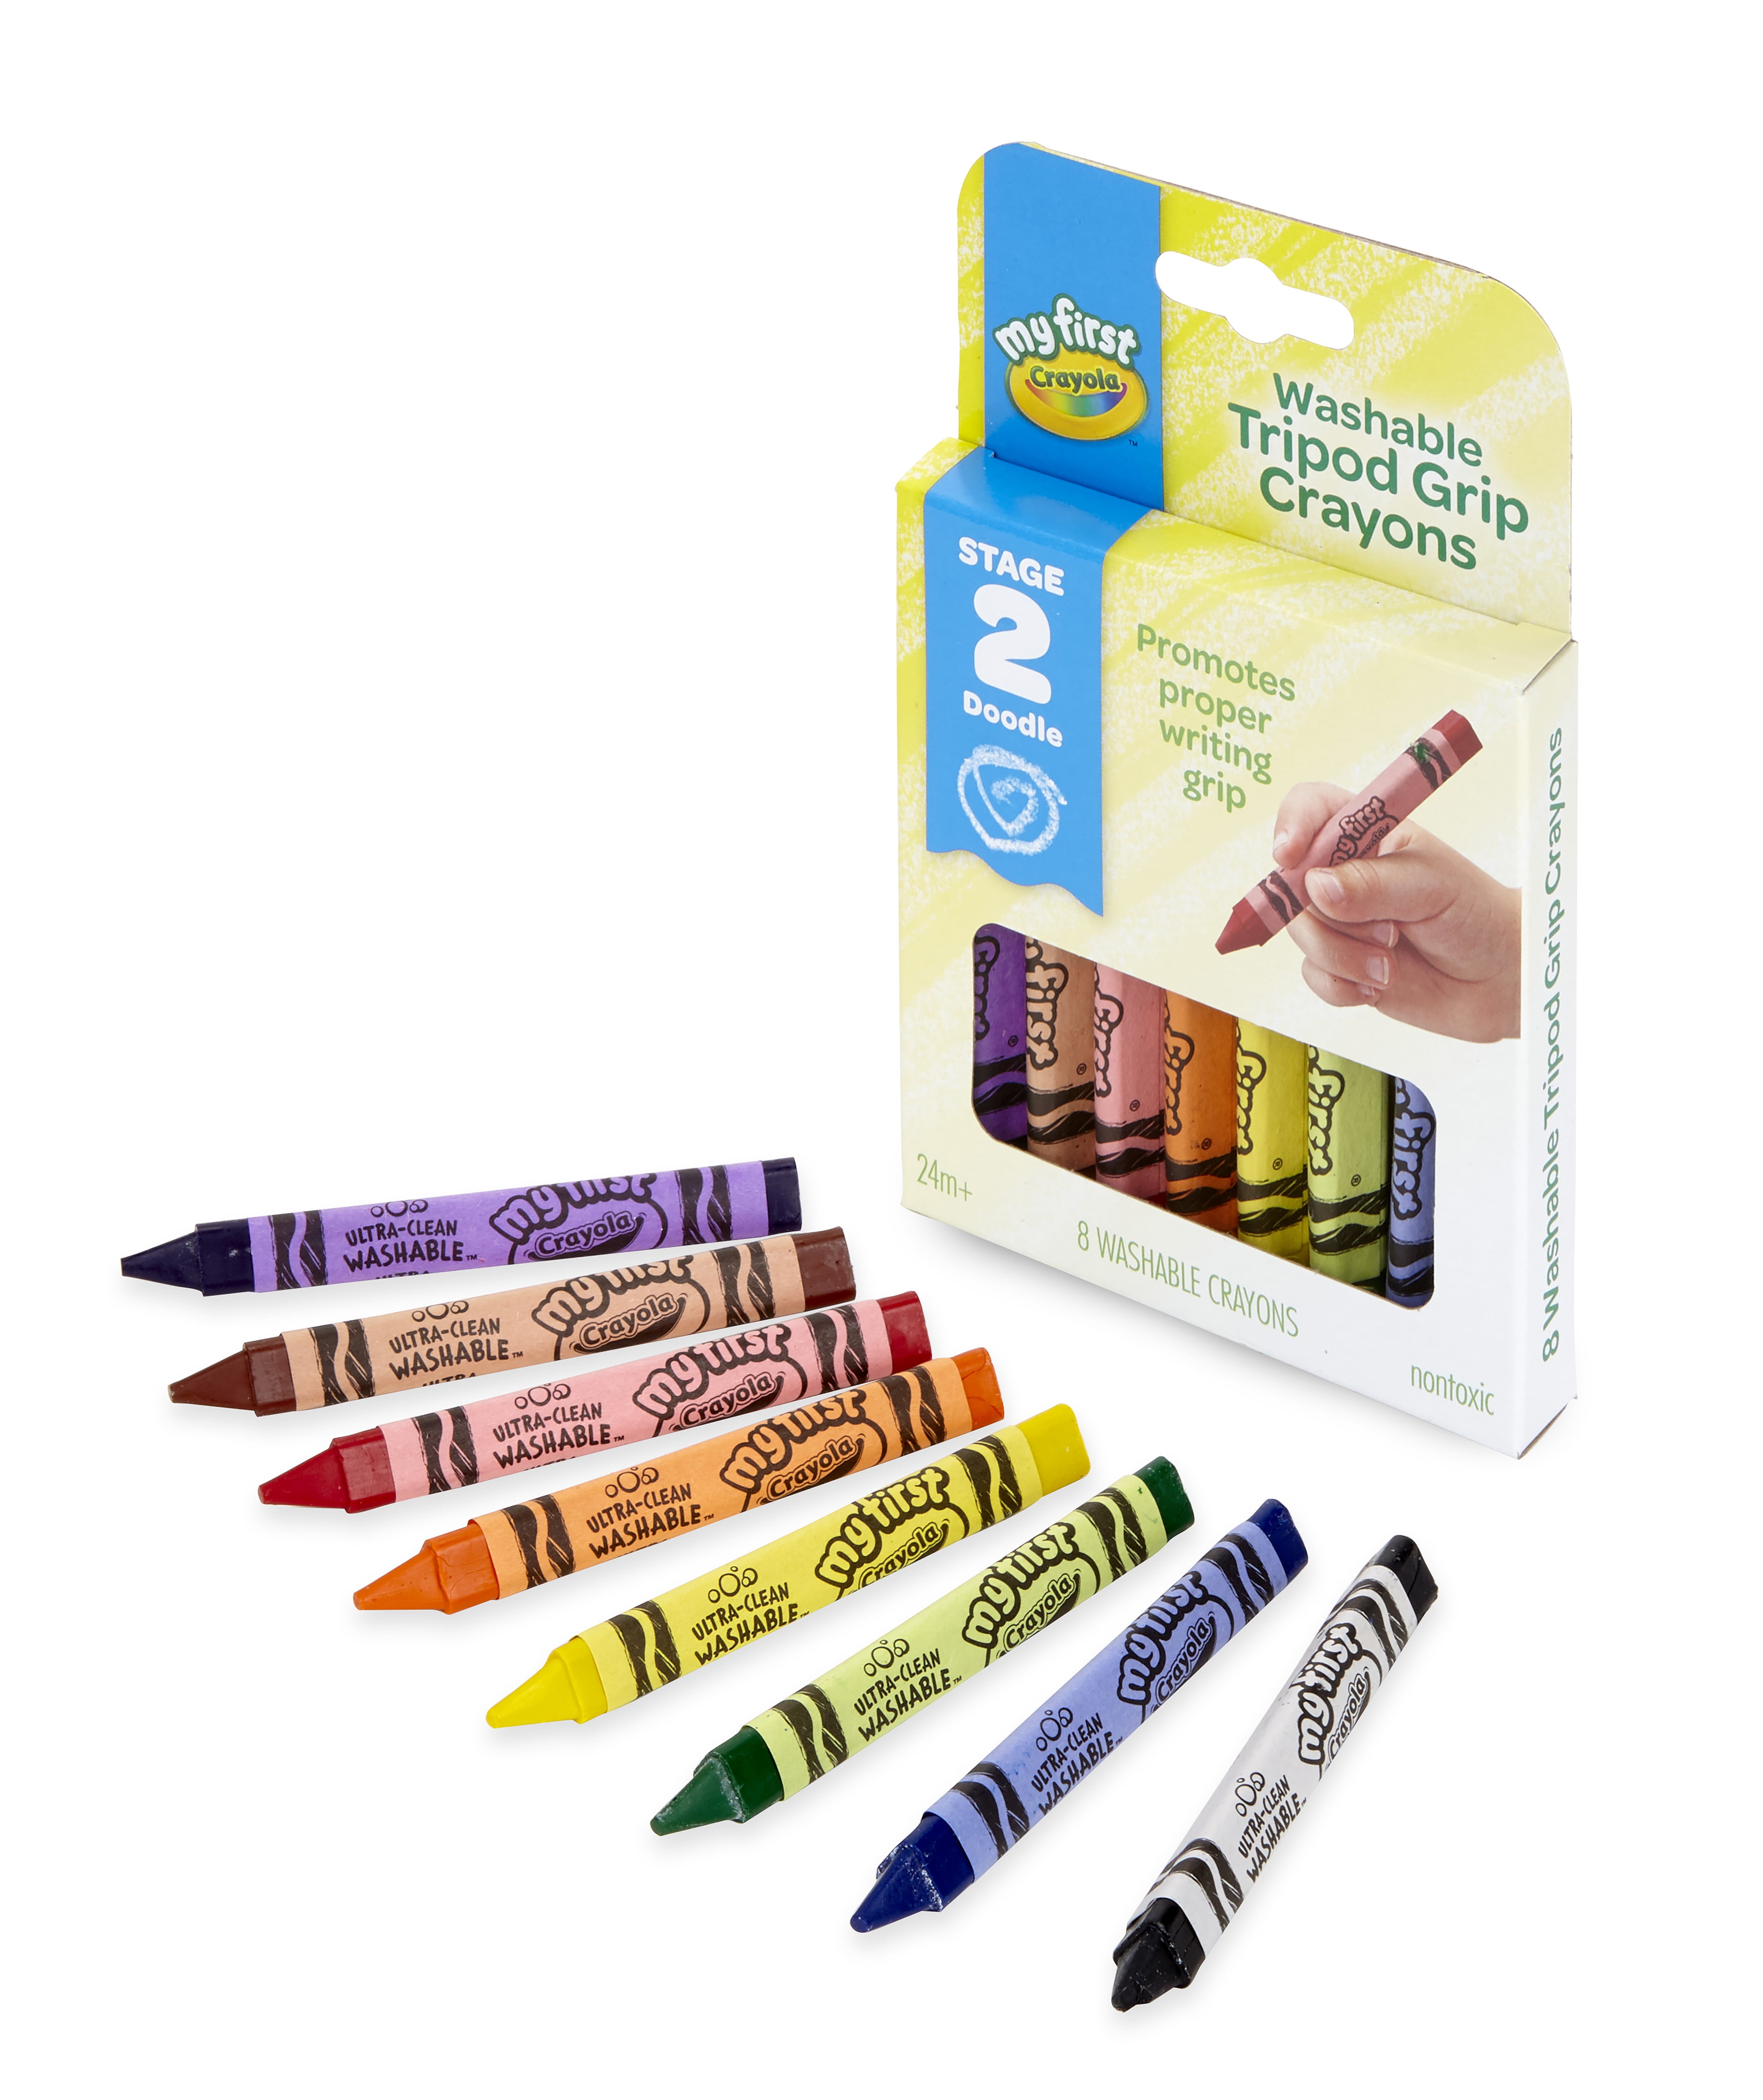 Wax Crayon Non-toxic washable Crayons Color Doodle Kids toy painting@@ 